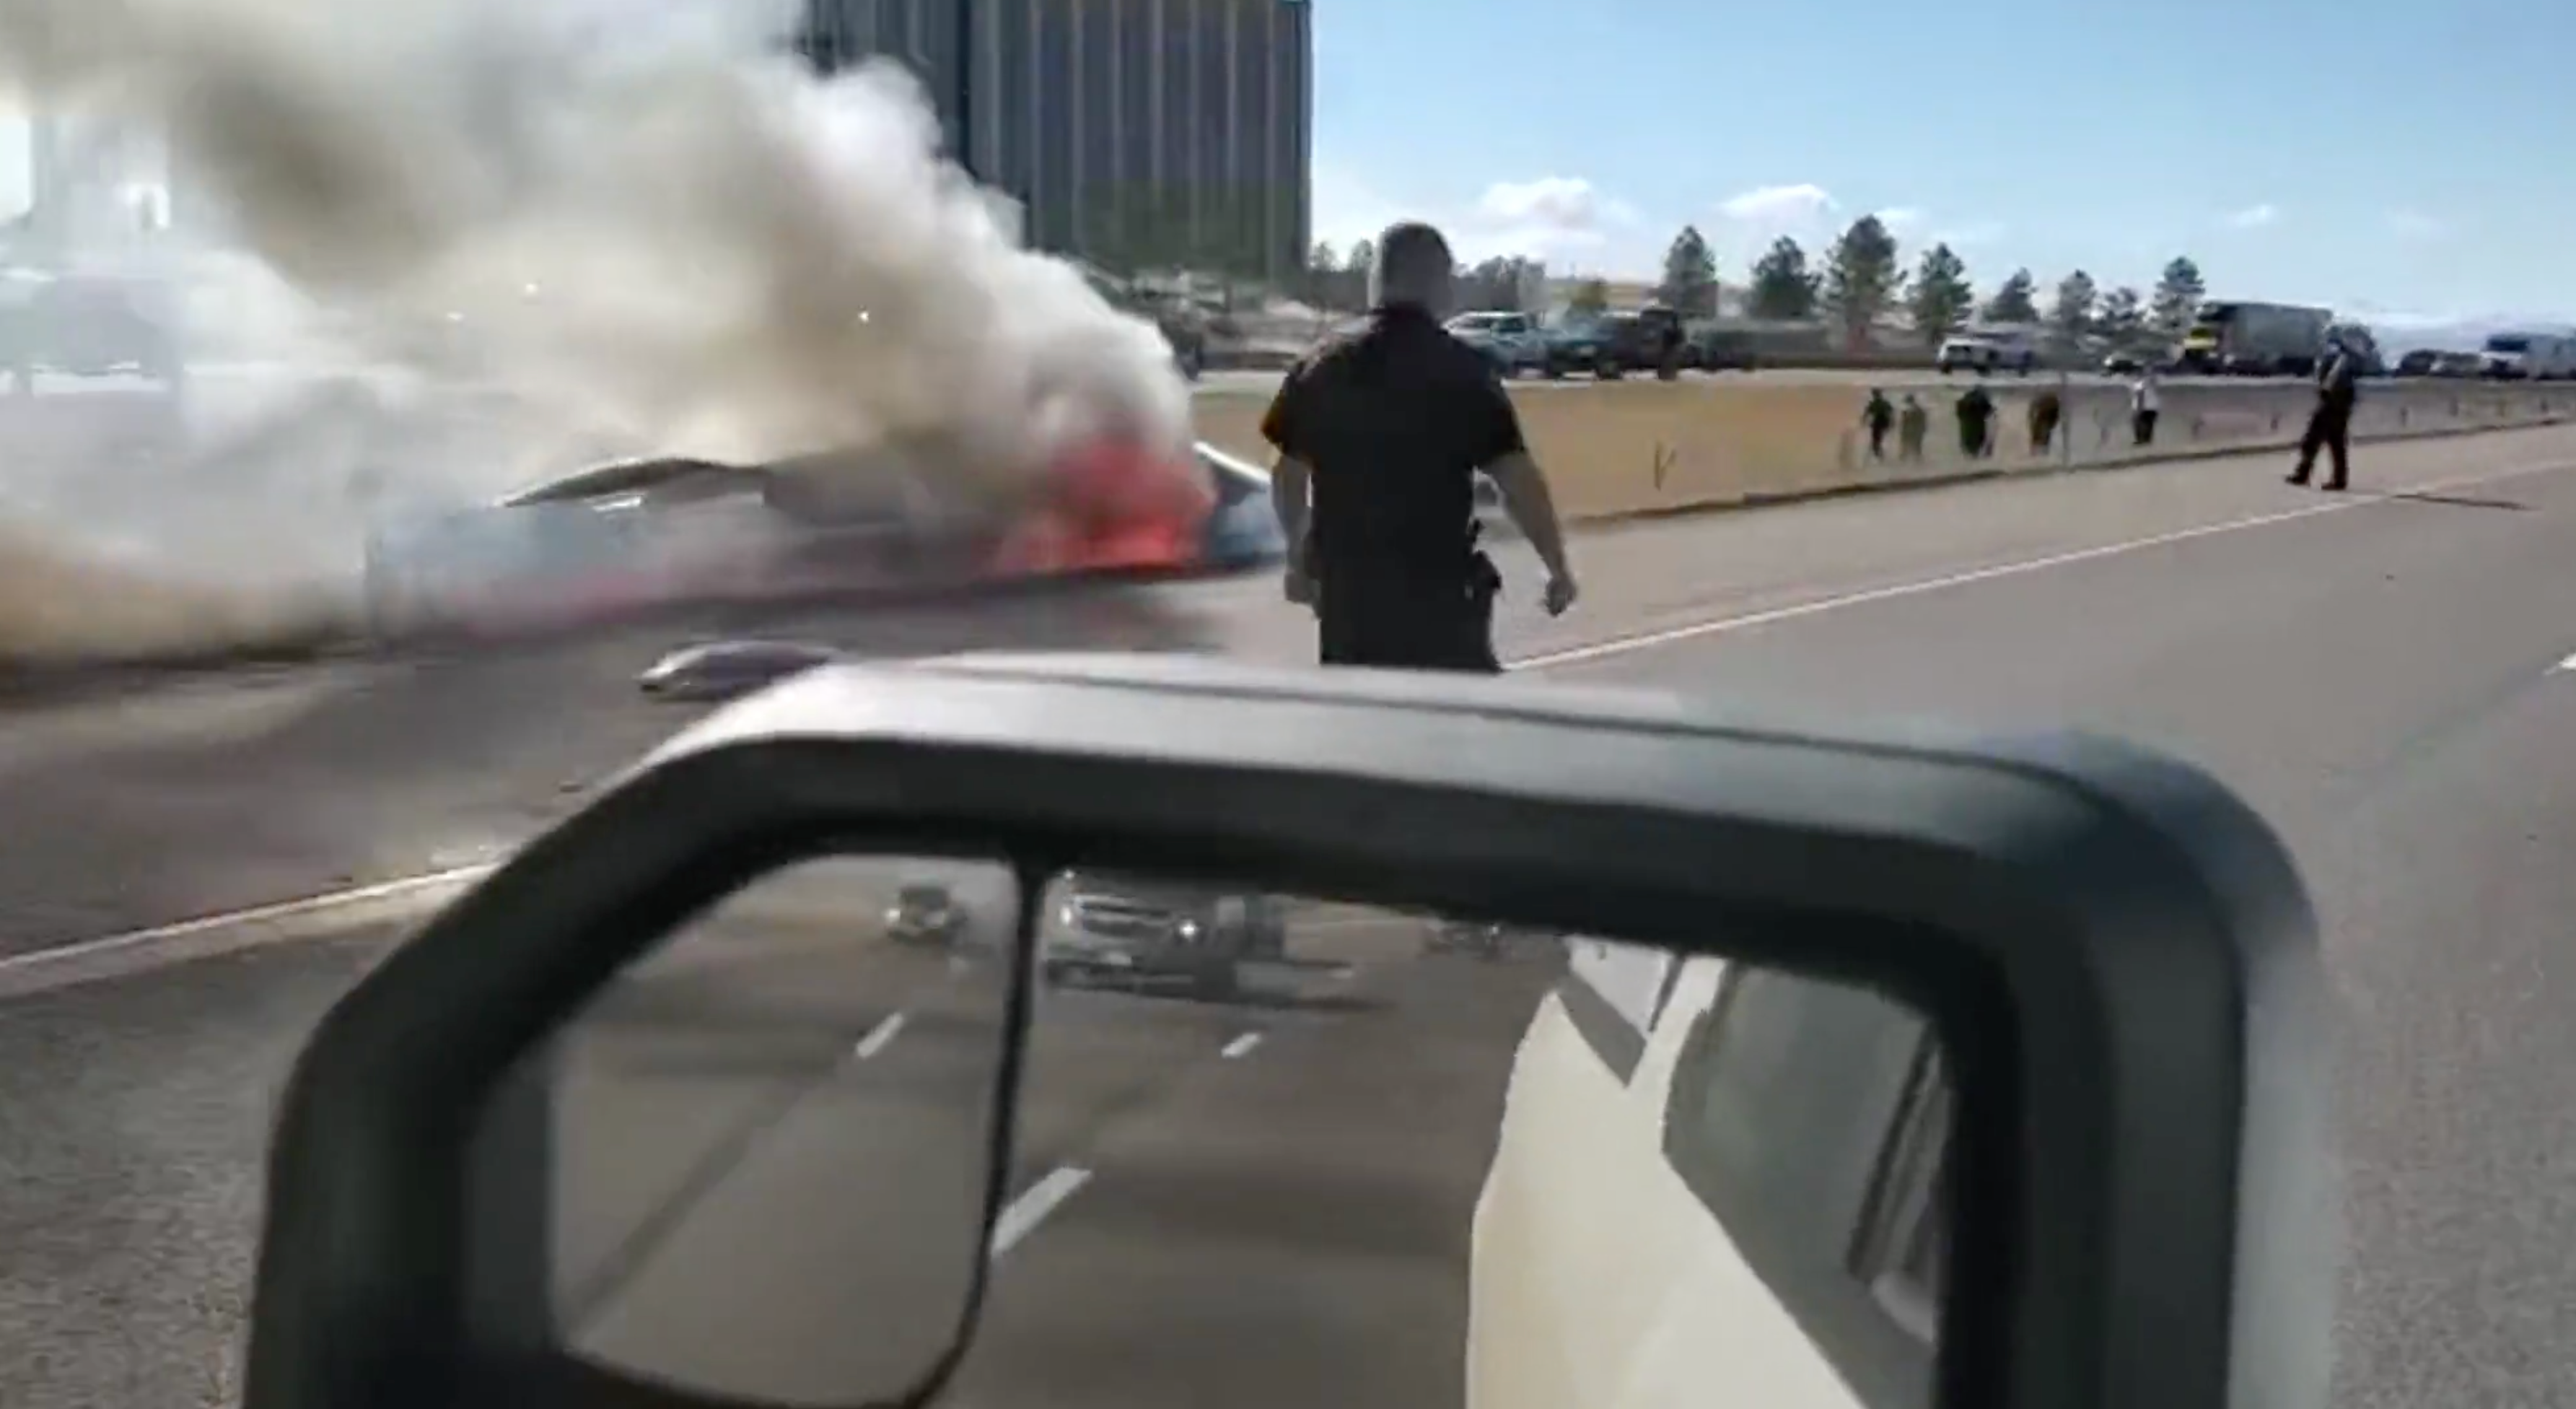 A driver in Colorado filmed the flaming wreckage of a small airplane that crashed into a highway